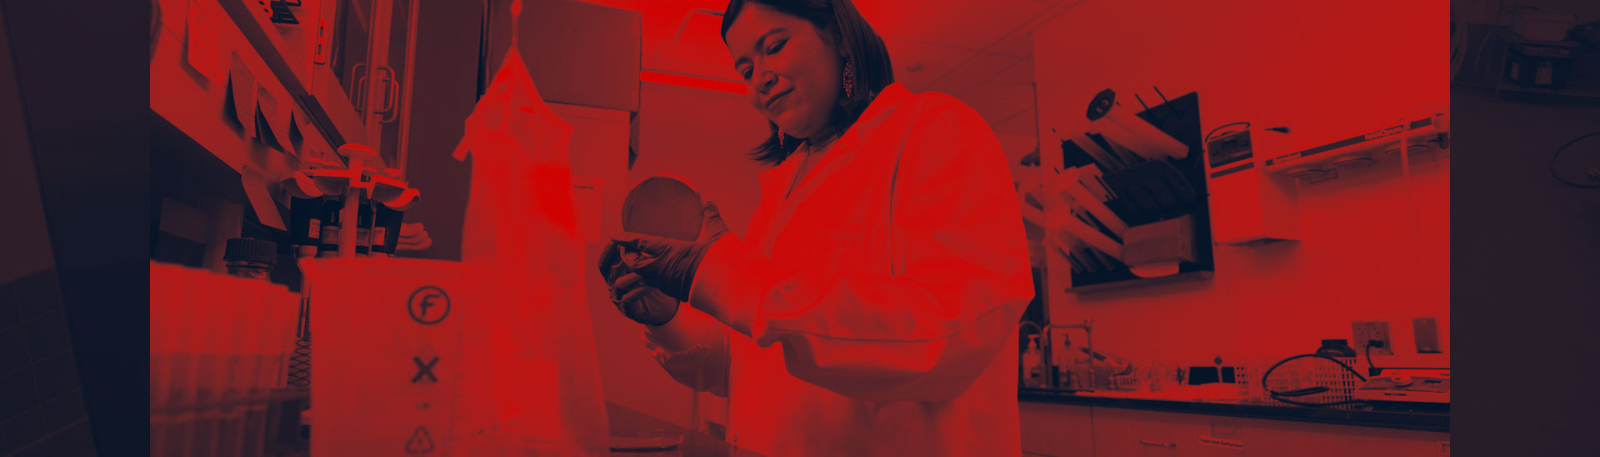 A student working in a lab.